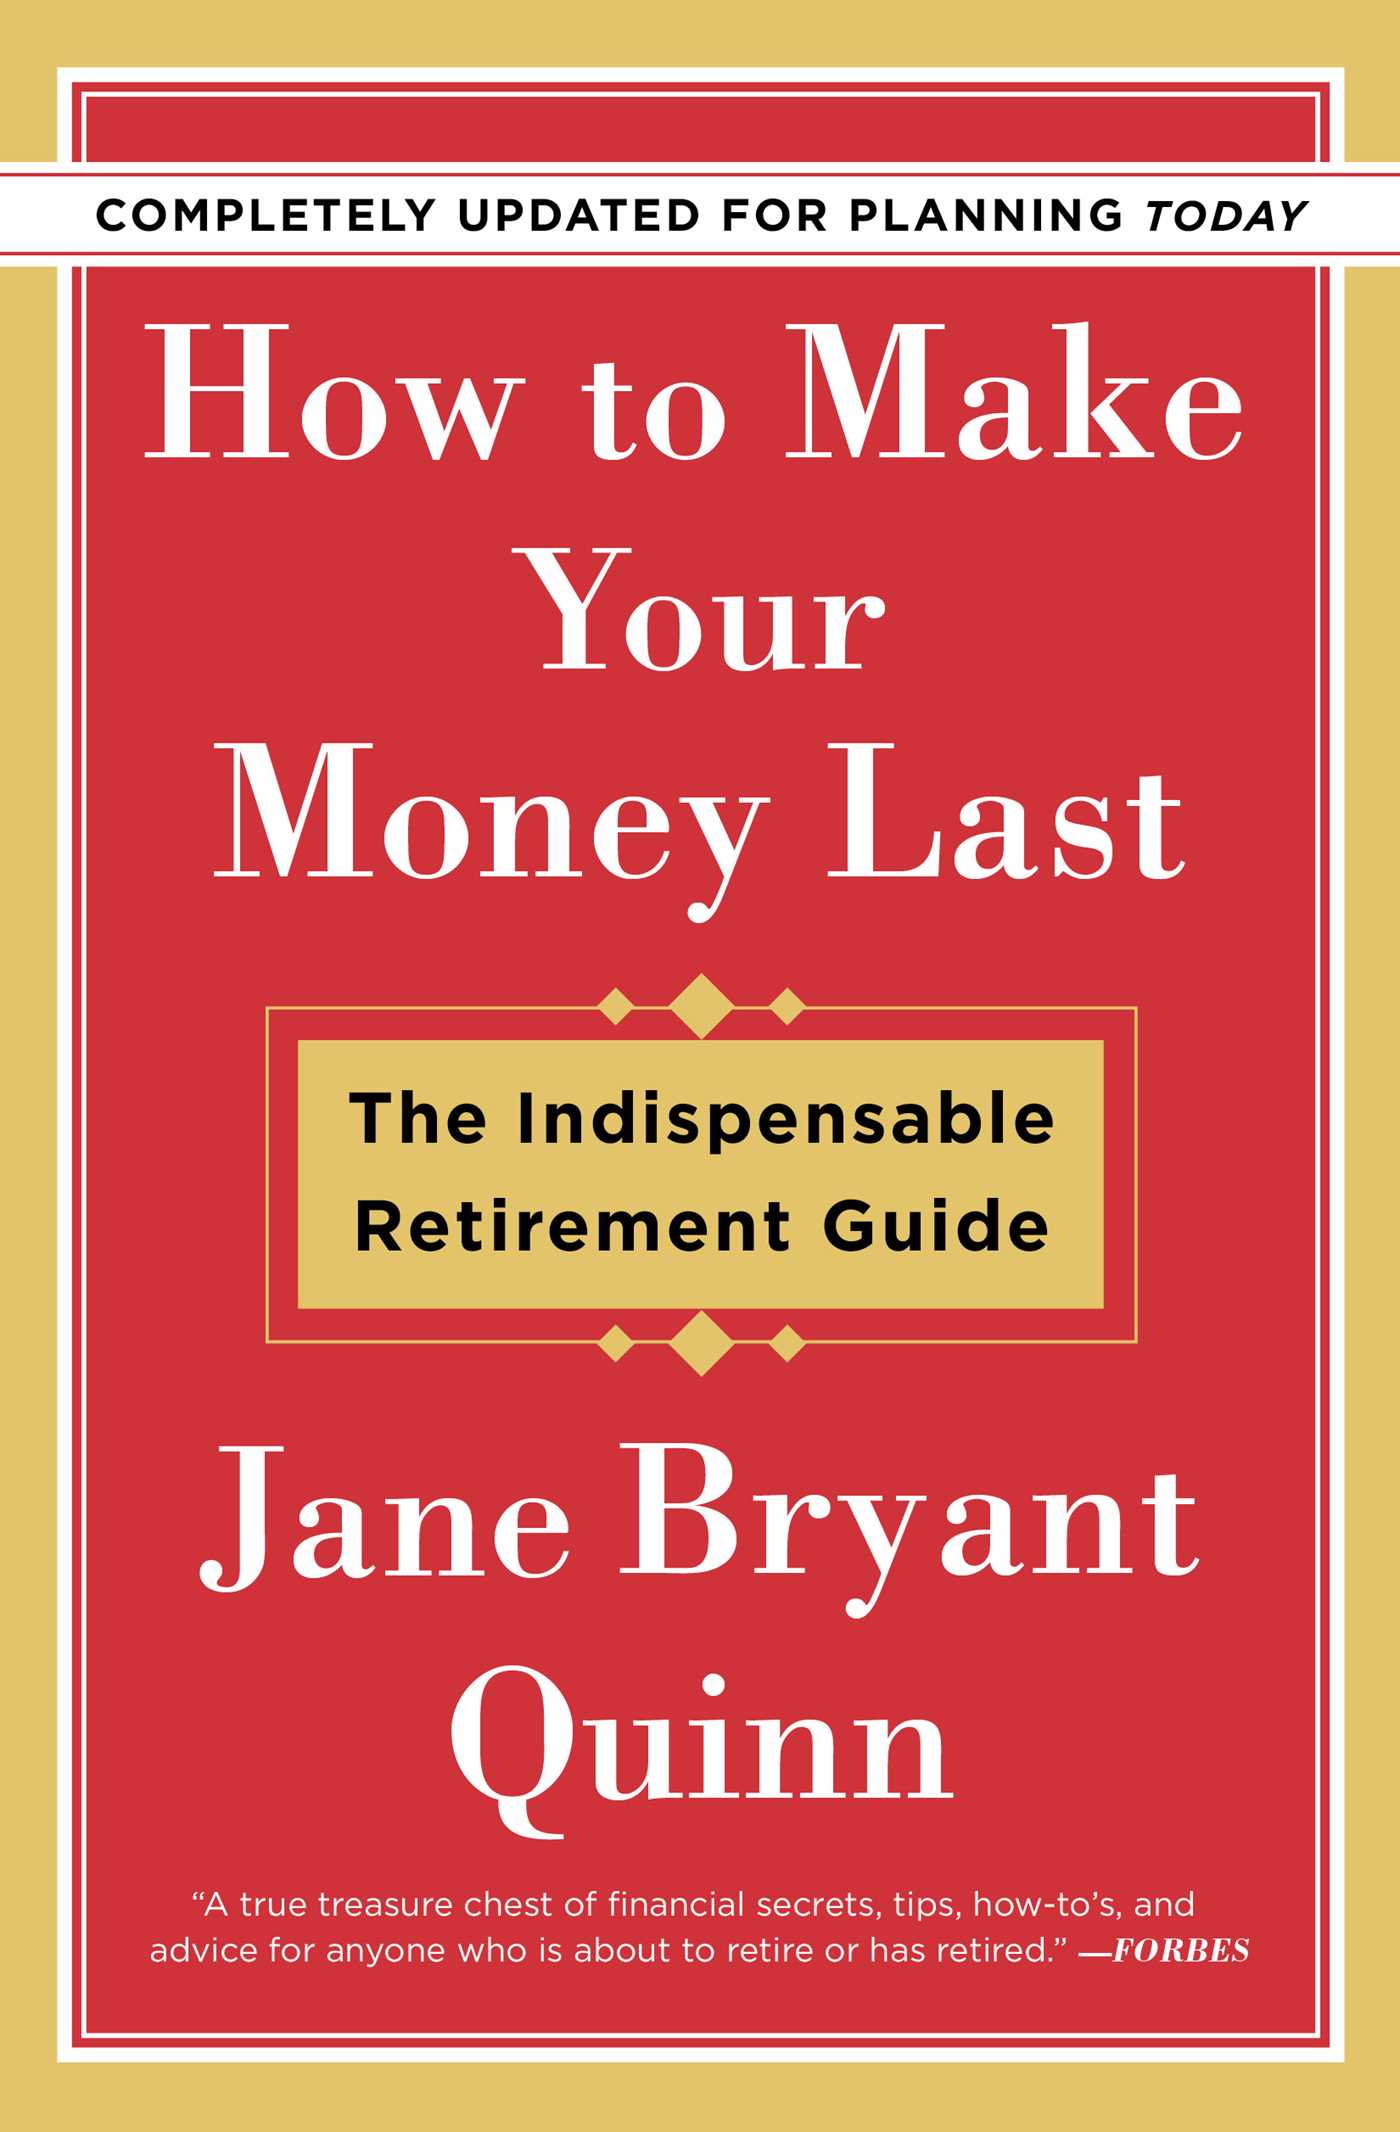 How To Make Your Money Last - Jane Bryant Quinn